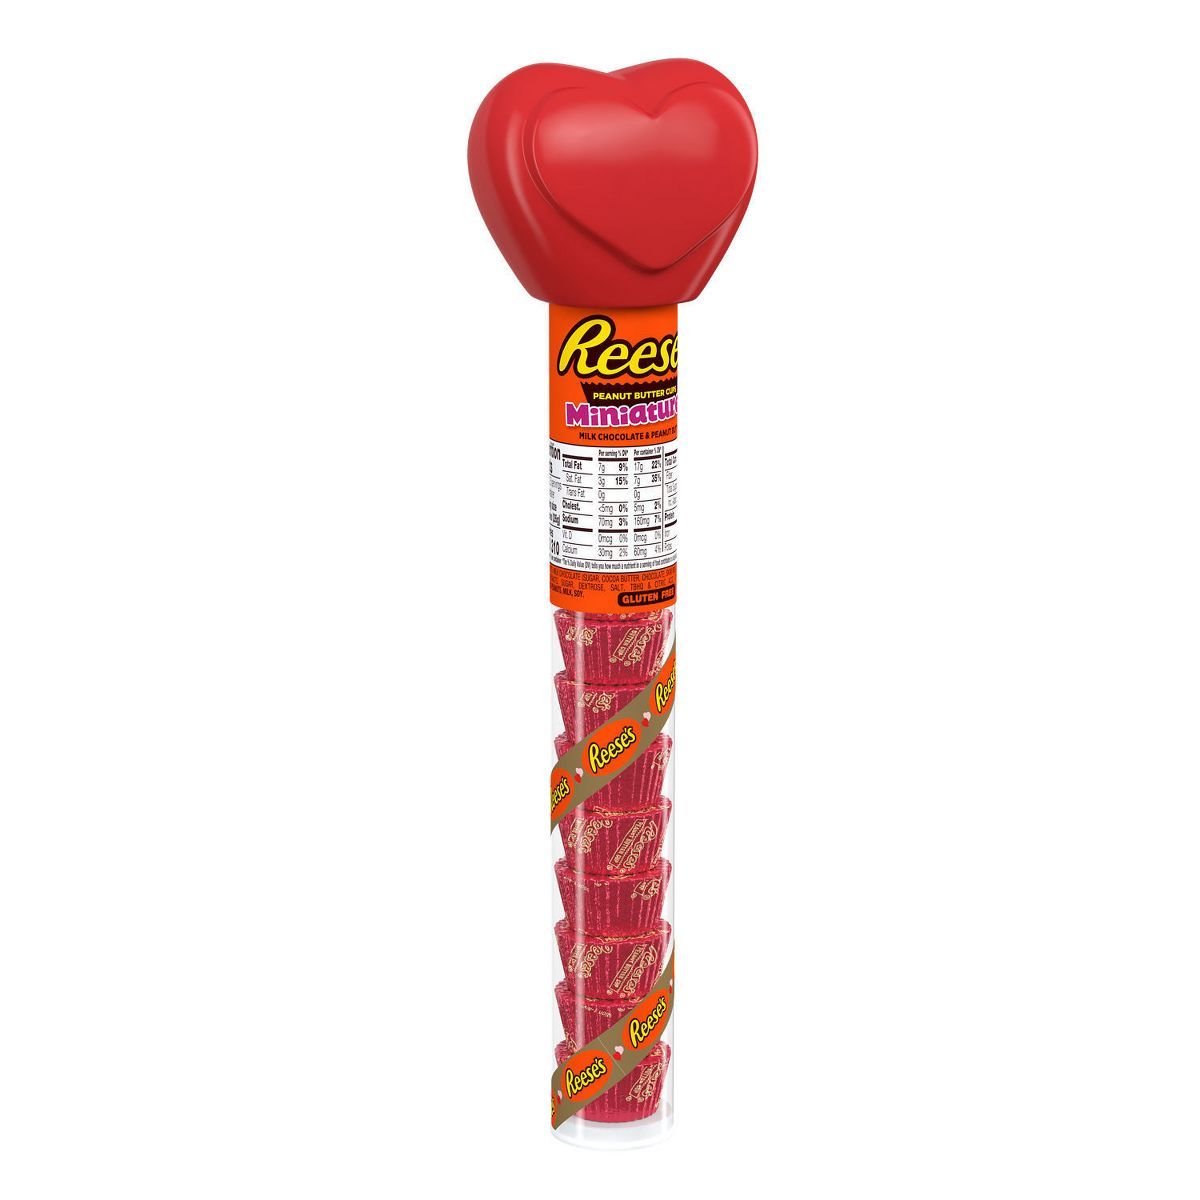 Reese's Valentine's Day Peanut Butter Candy Cane Miniatures - 2.17oz | Target